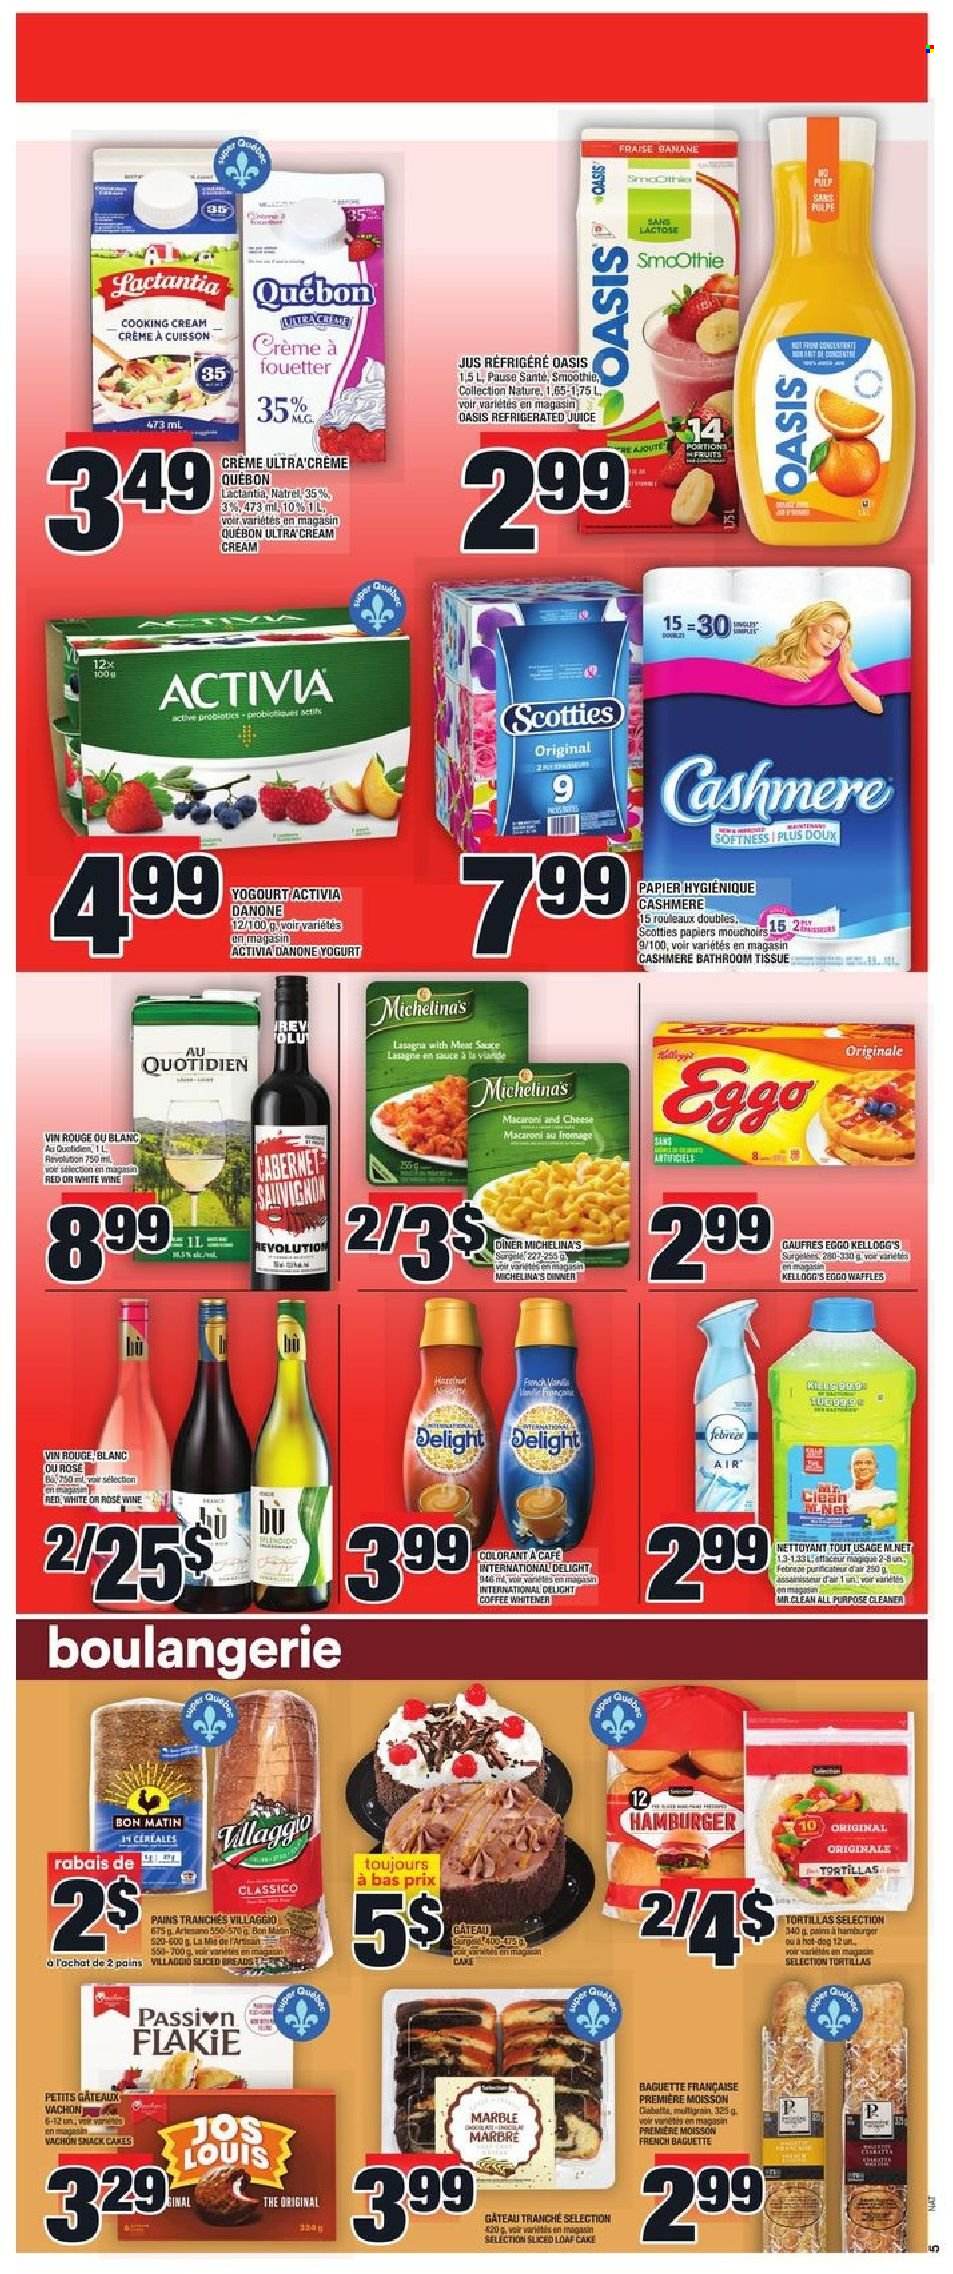 thumbnail - Super C Flyer - September 23, 2021 - September 29, 2021 - Sales products - tortillas, cake, waffles, loaf cake, macaroni, hamburger, sauce, lasagna meal, yoghurt, Activia, snack, Kellogg's, Classico, juice, smoothie, coffee, rosé wine, bath tissue, cleaner, all purpose cleaner, Danone, baguette. Page 6.